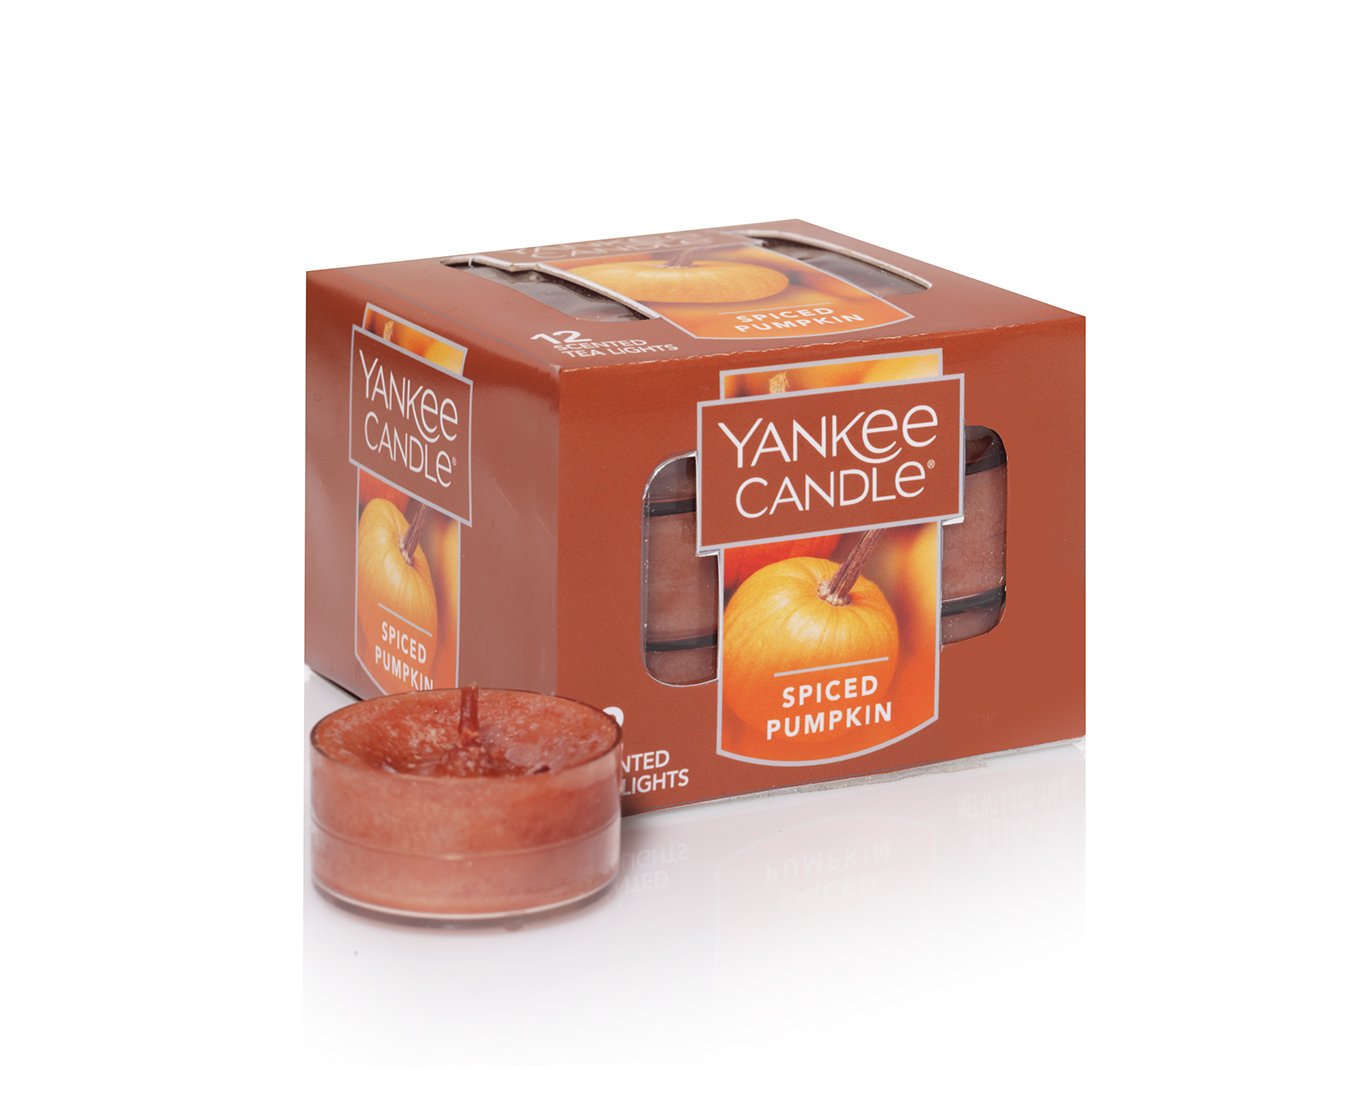 Scented Tea Light Candles in Spiced Pumpkin